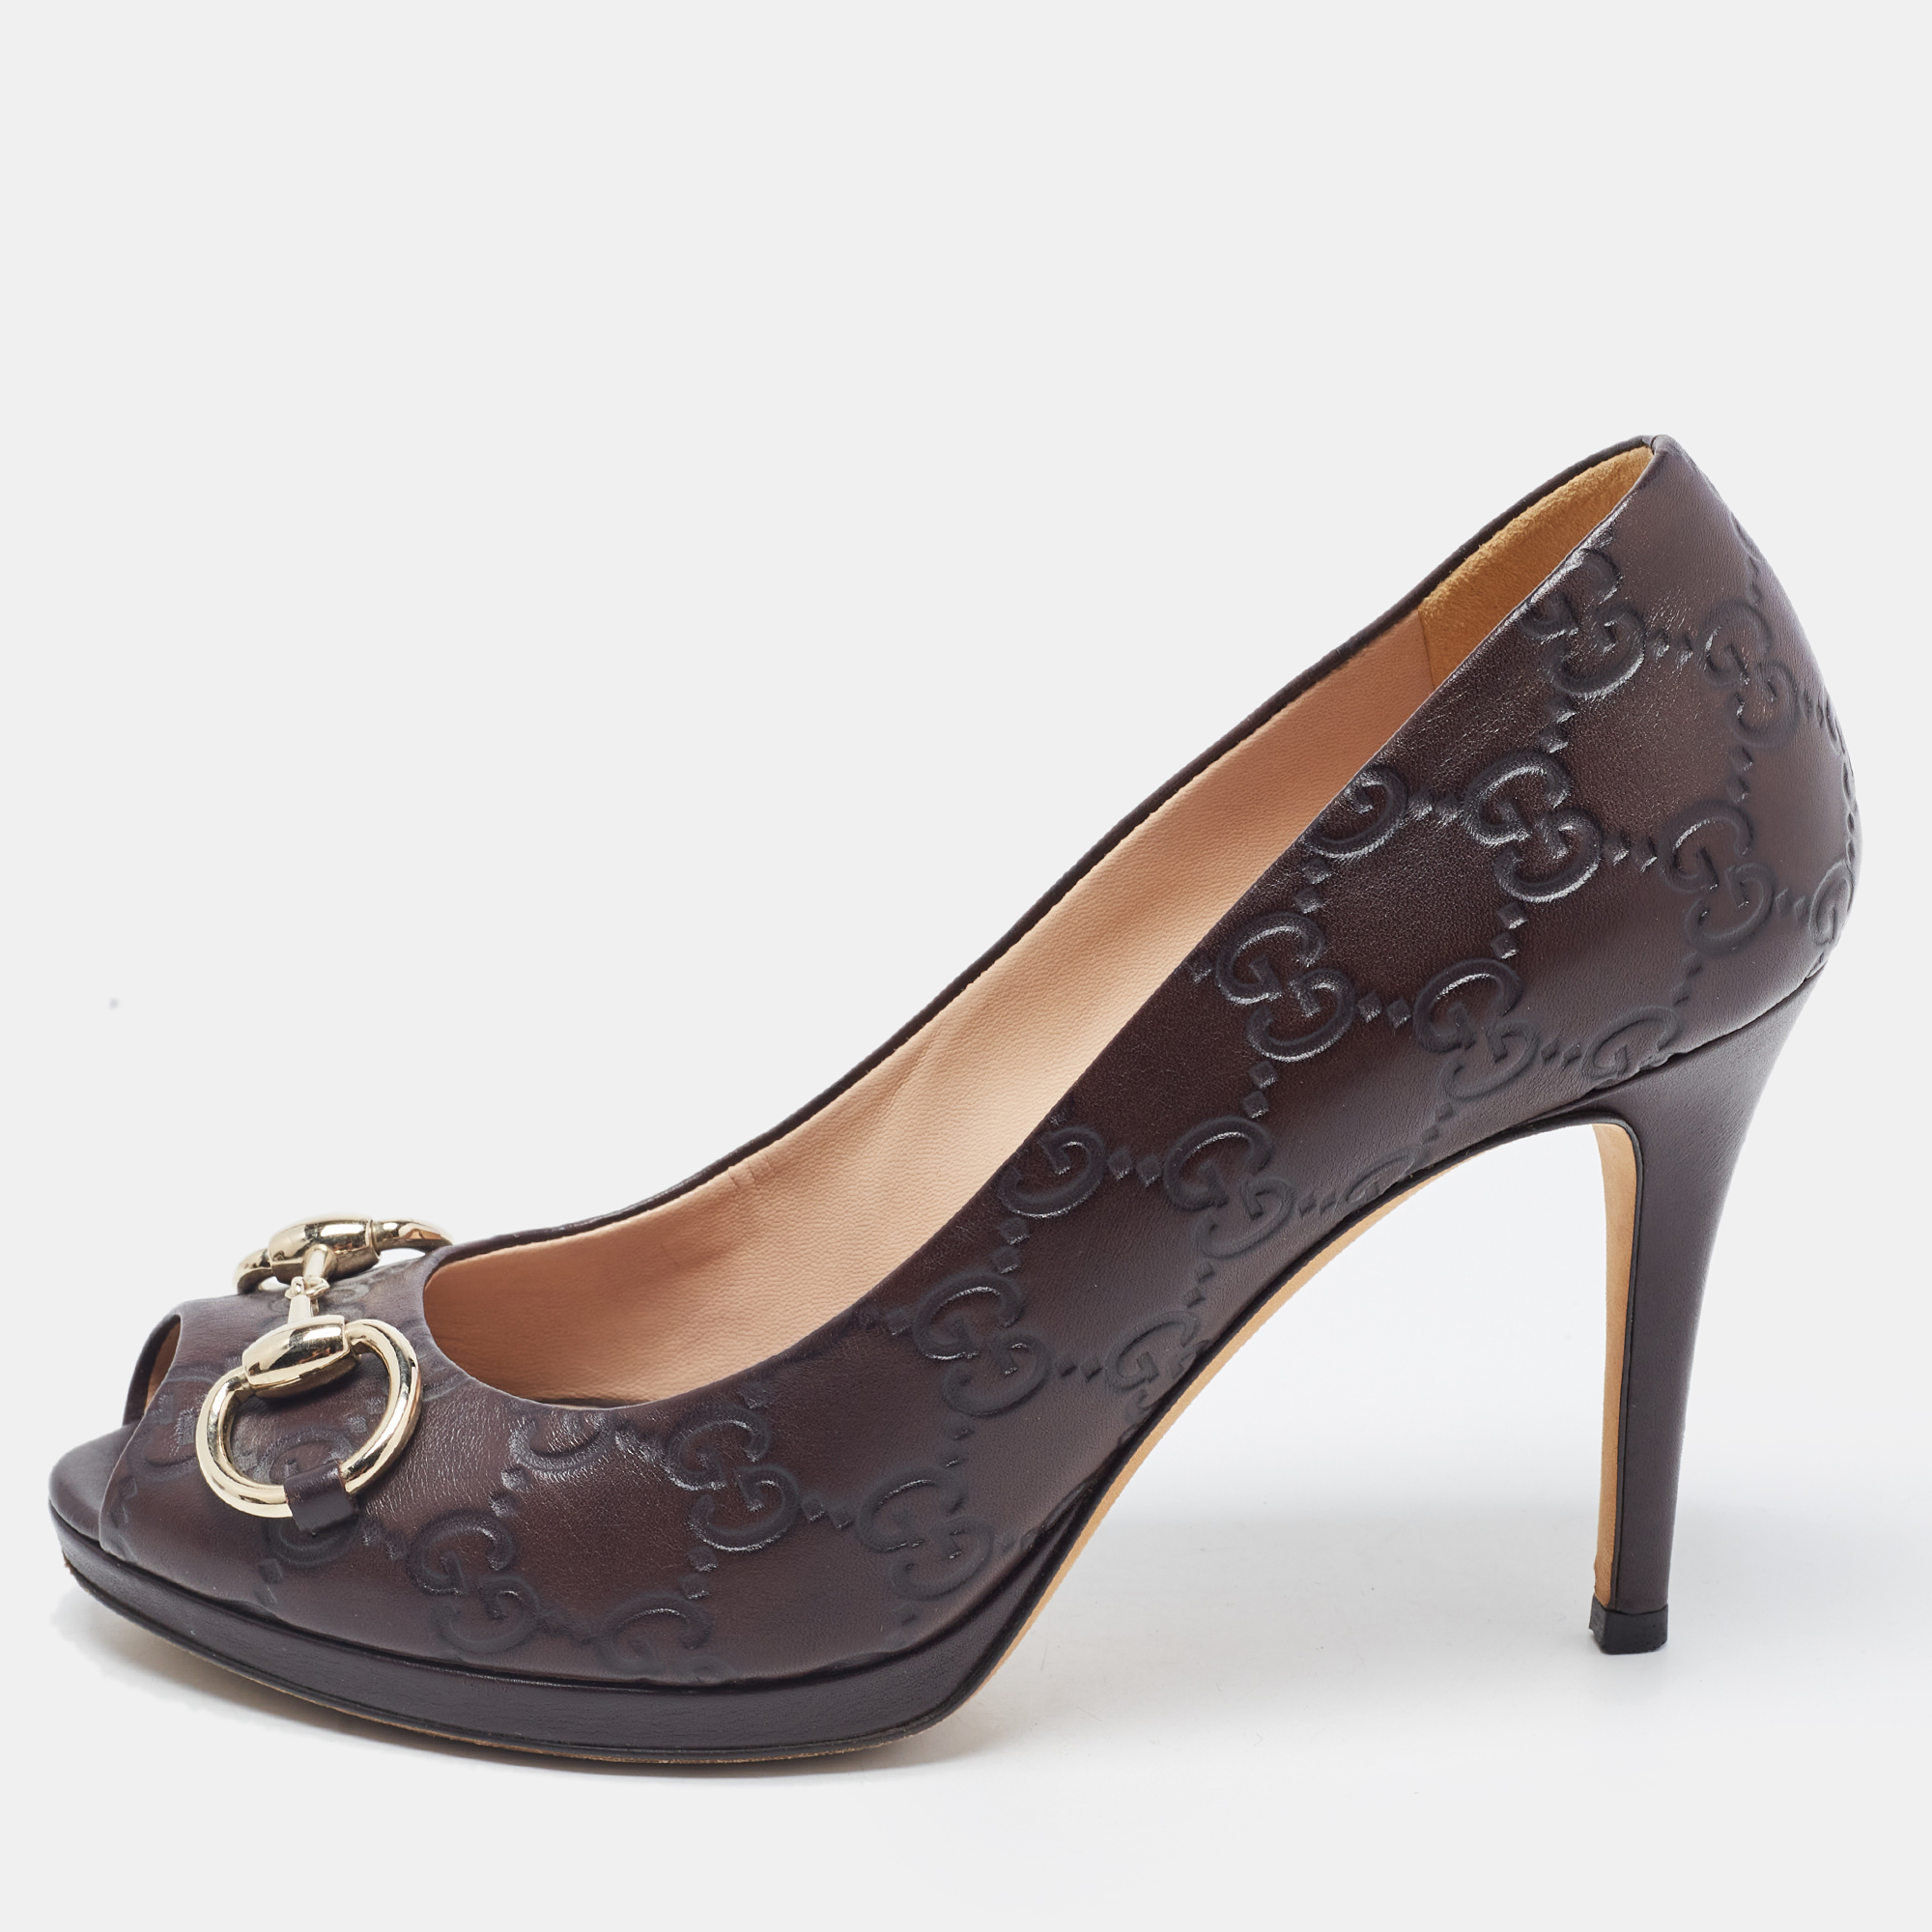 Gucci dark brown guccissima leather new hollywood pumps size 37